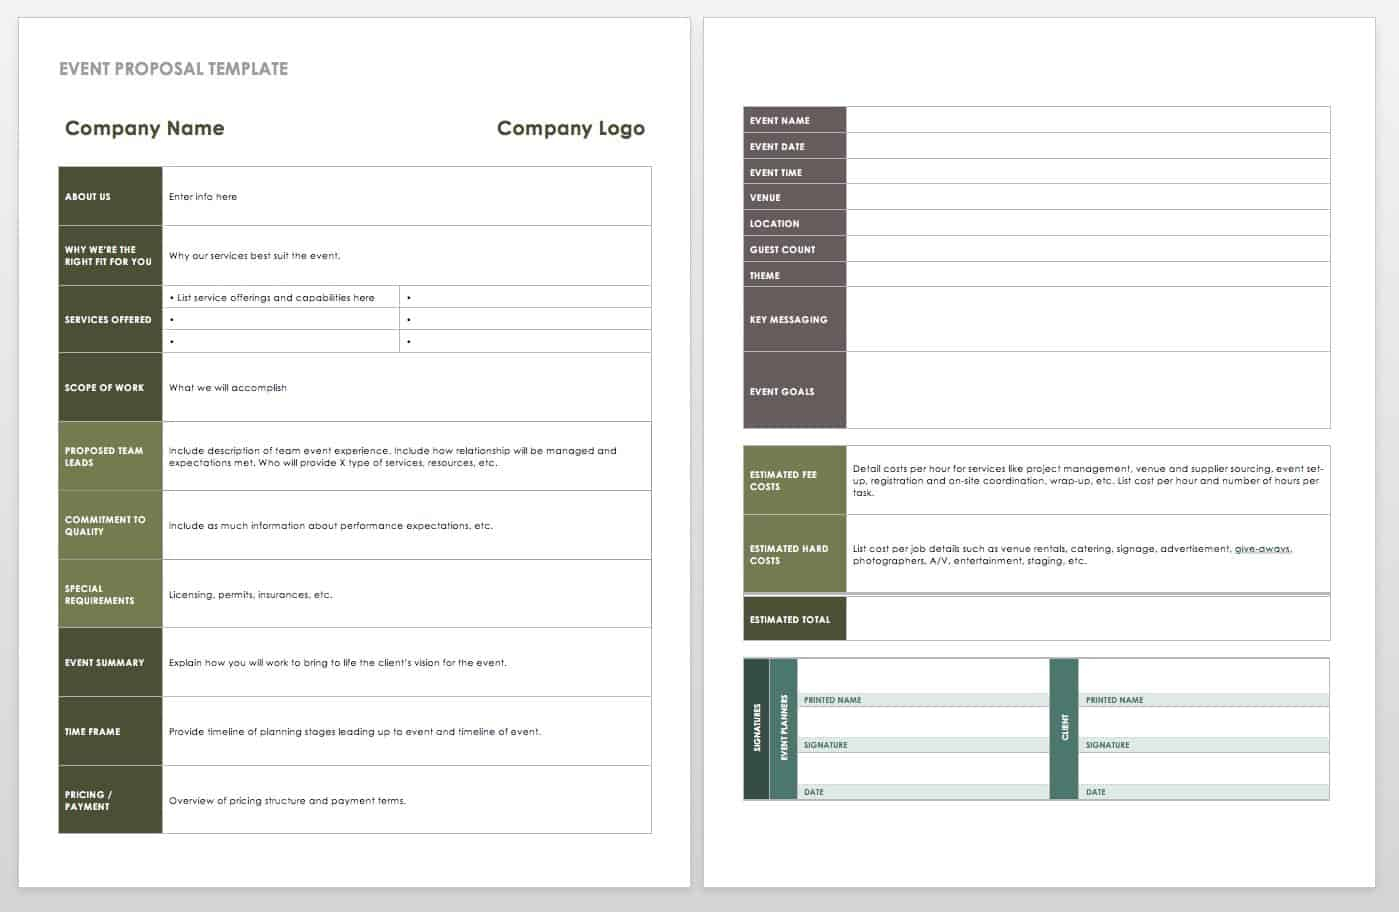 11 Free Event Planning Templates  Smartsheet Throughout Corporate Event Checklist Template For Corporate Event Checklist Template